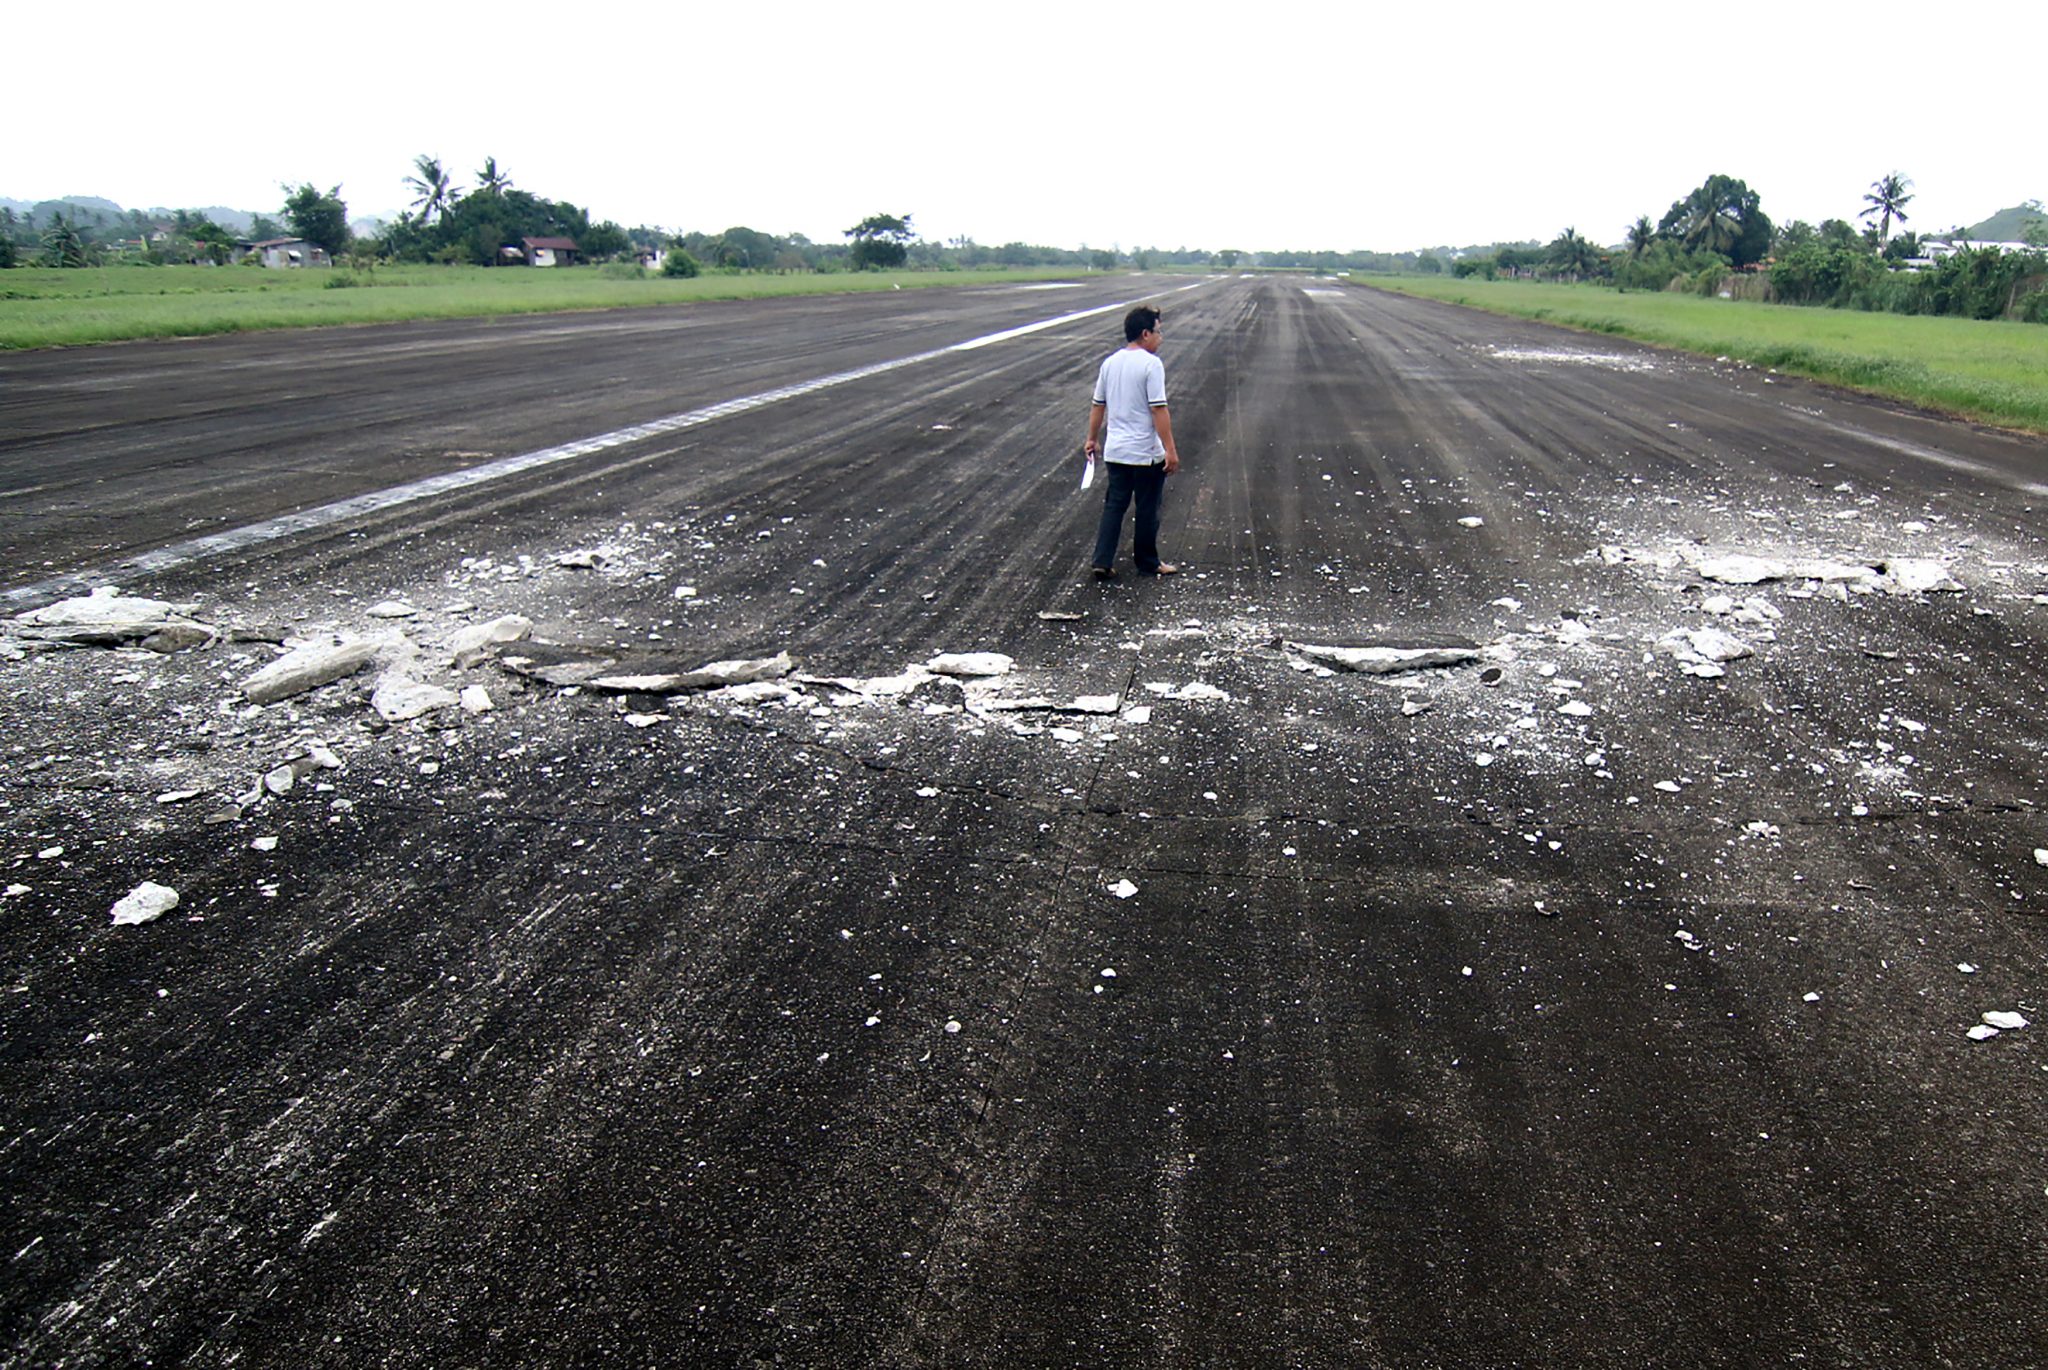 A man walks past the damaged runway of the dometic airport after a 6.5-magnitude earthquake struck overnight in Surigao City in southern island of Mindanao on February 11, 2017. A strong quake shook the southern Philippines on February 10, killing at least three people, toppling buildings and sending panicked residents fleeing their homes, media reports and authorities said. / AFP PHOTO / ERWIN MASCARINAS